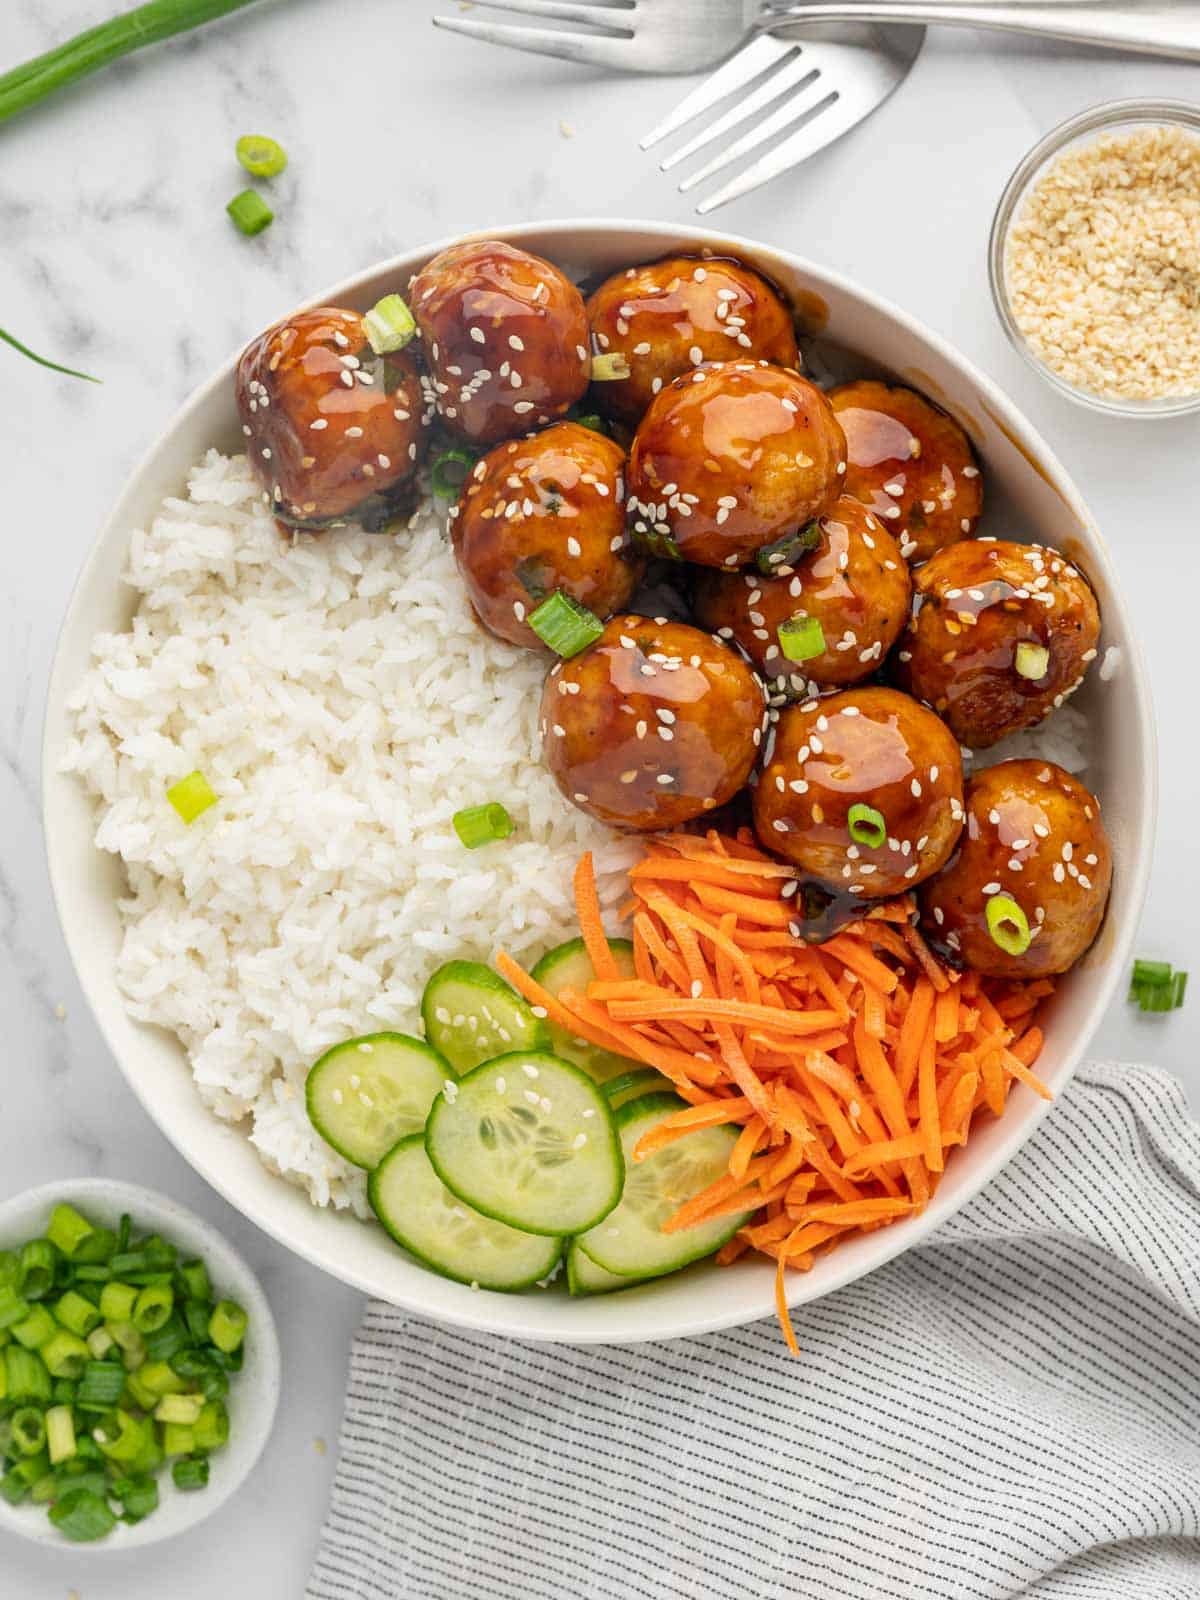 Teriyaki meatballs on a plate with rice, sliced cucumber and julienned carrots.